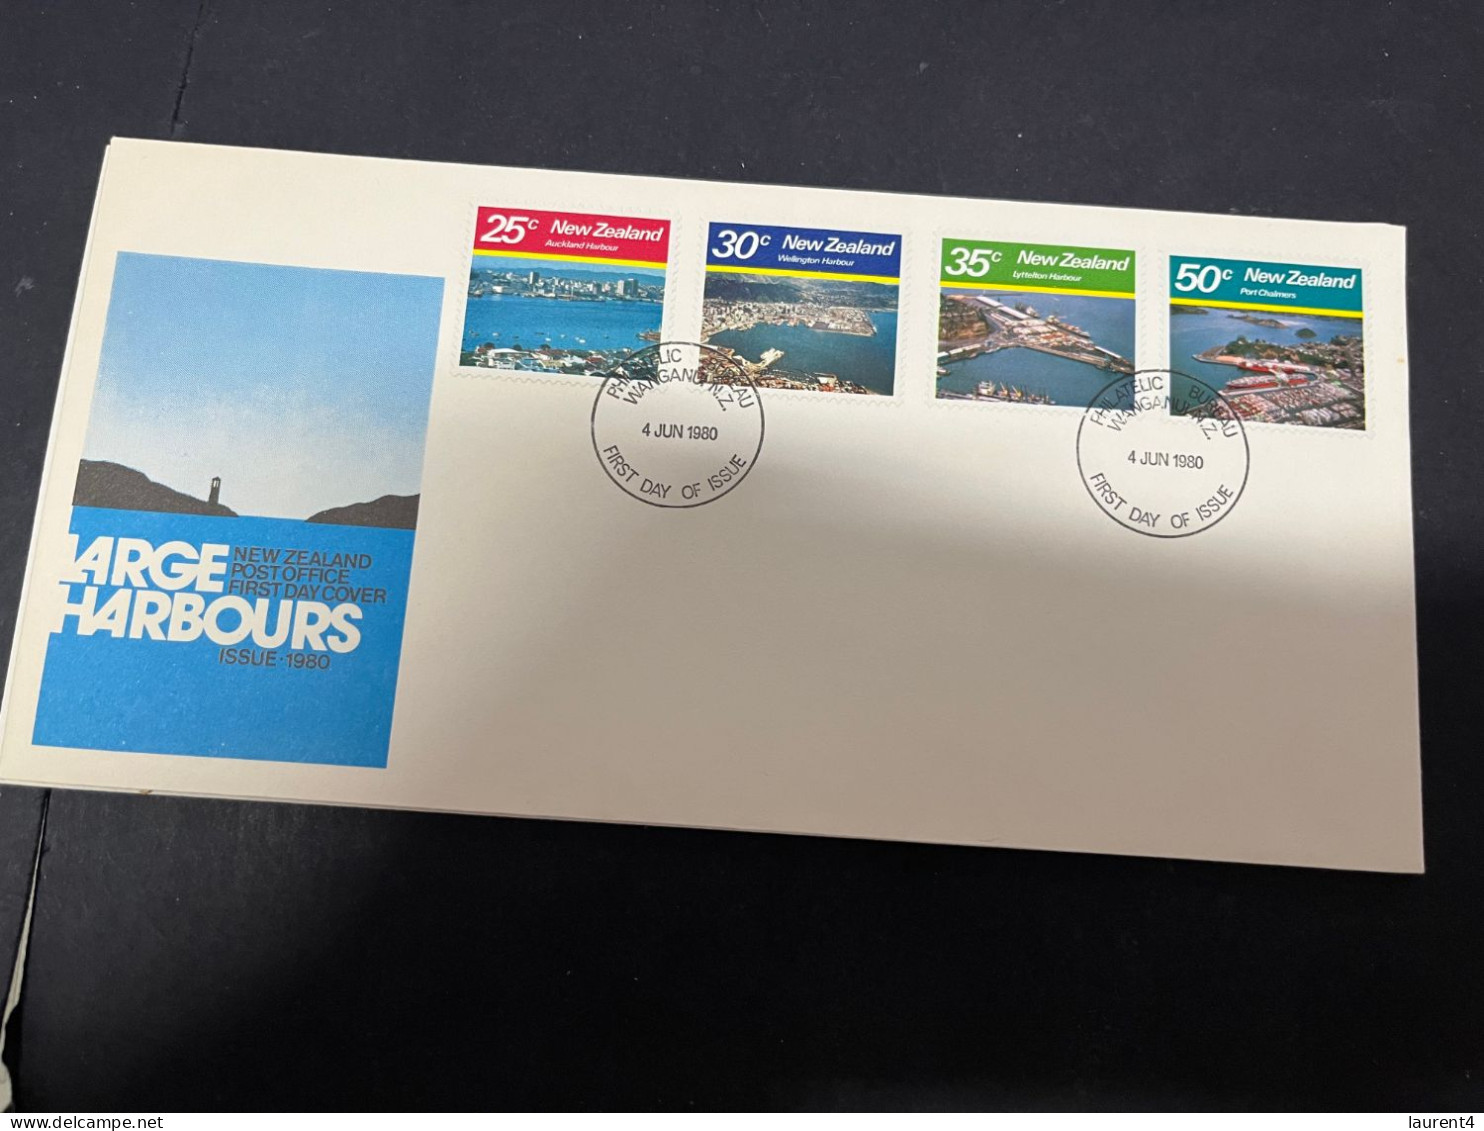 1-5-2024 (3 Z 32) FDC New Zealand - 1980 - Large Harbours - FDC